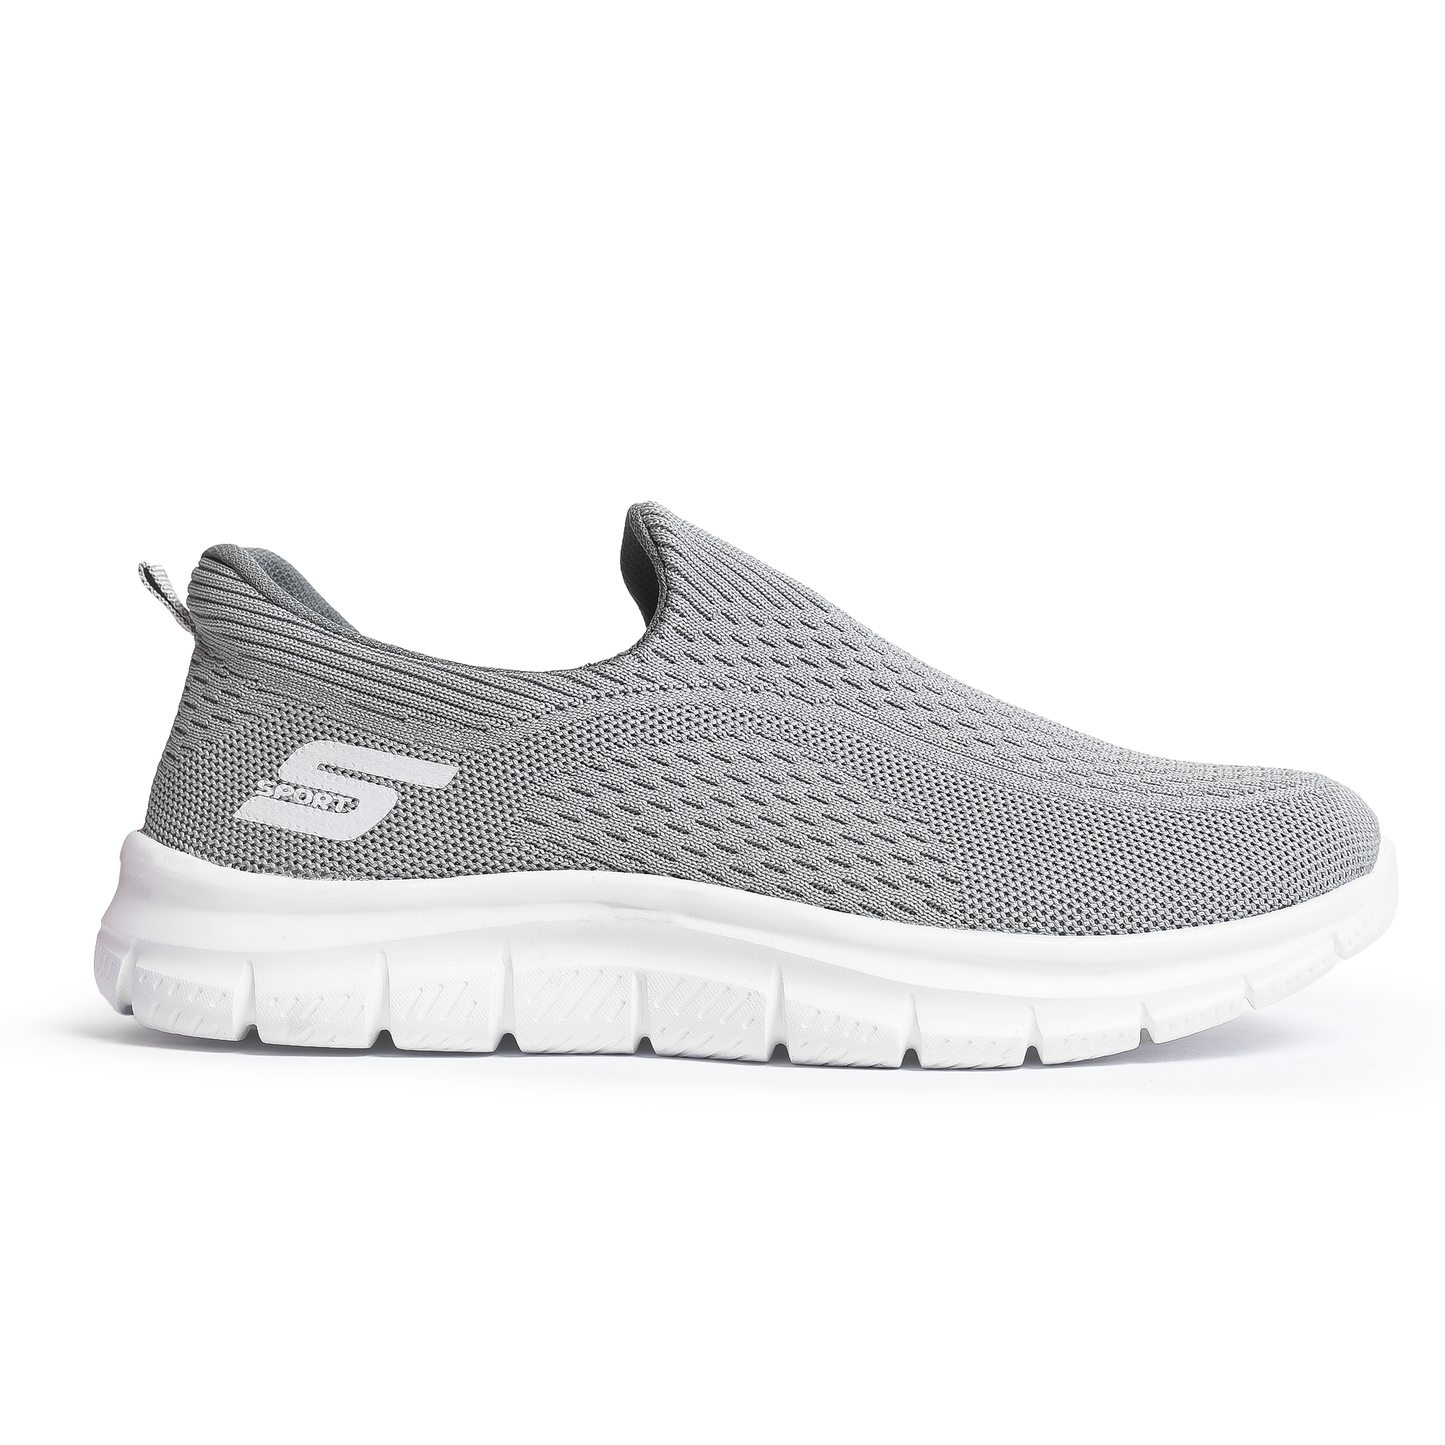 Sportive Comfy Light Weight Sneakers For Men